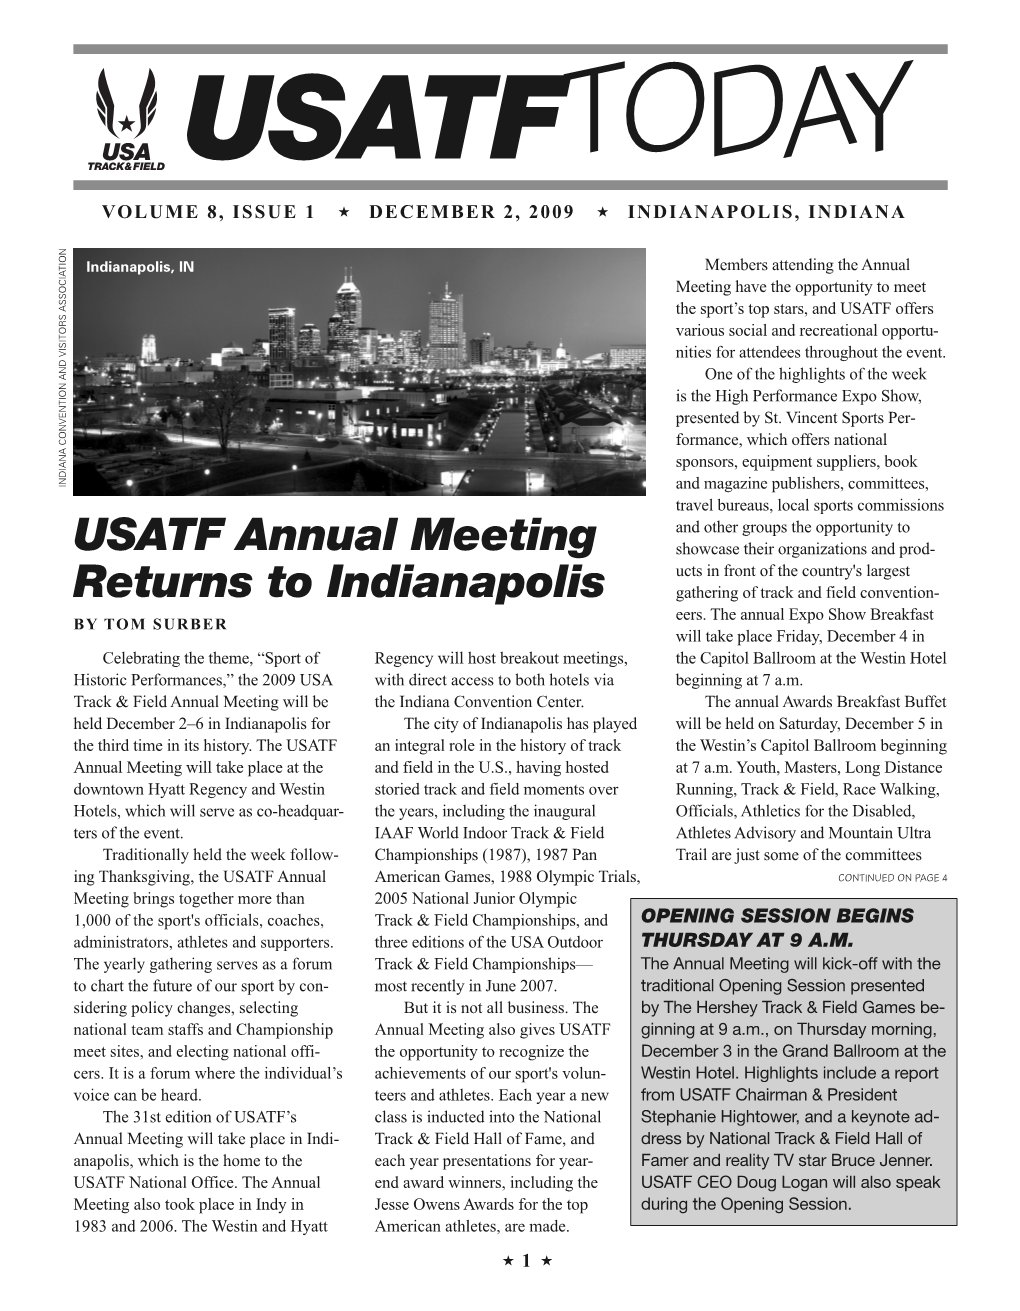 USATF Annual Meeting Returns to Indianapolis